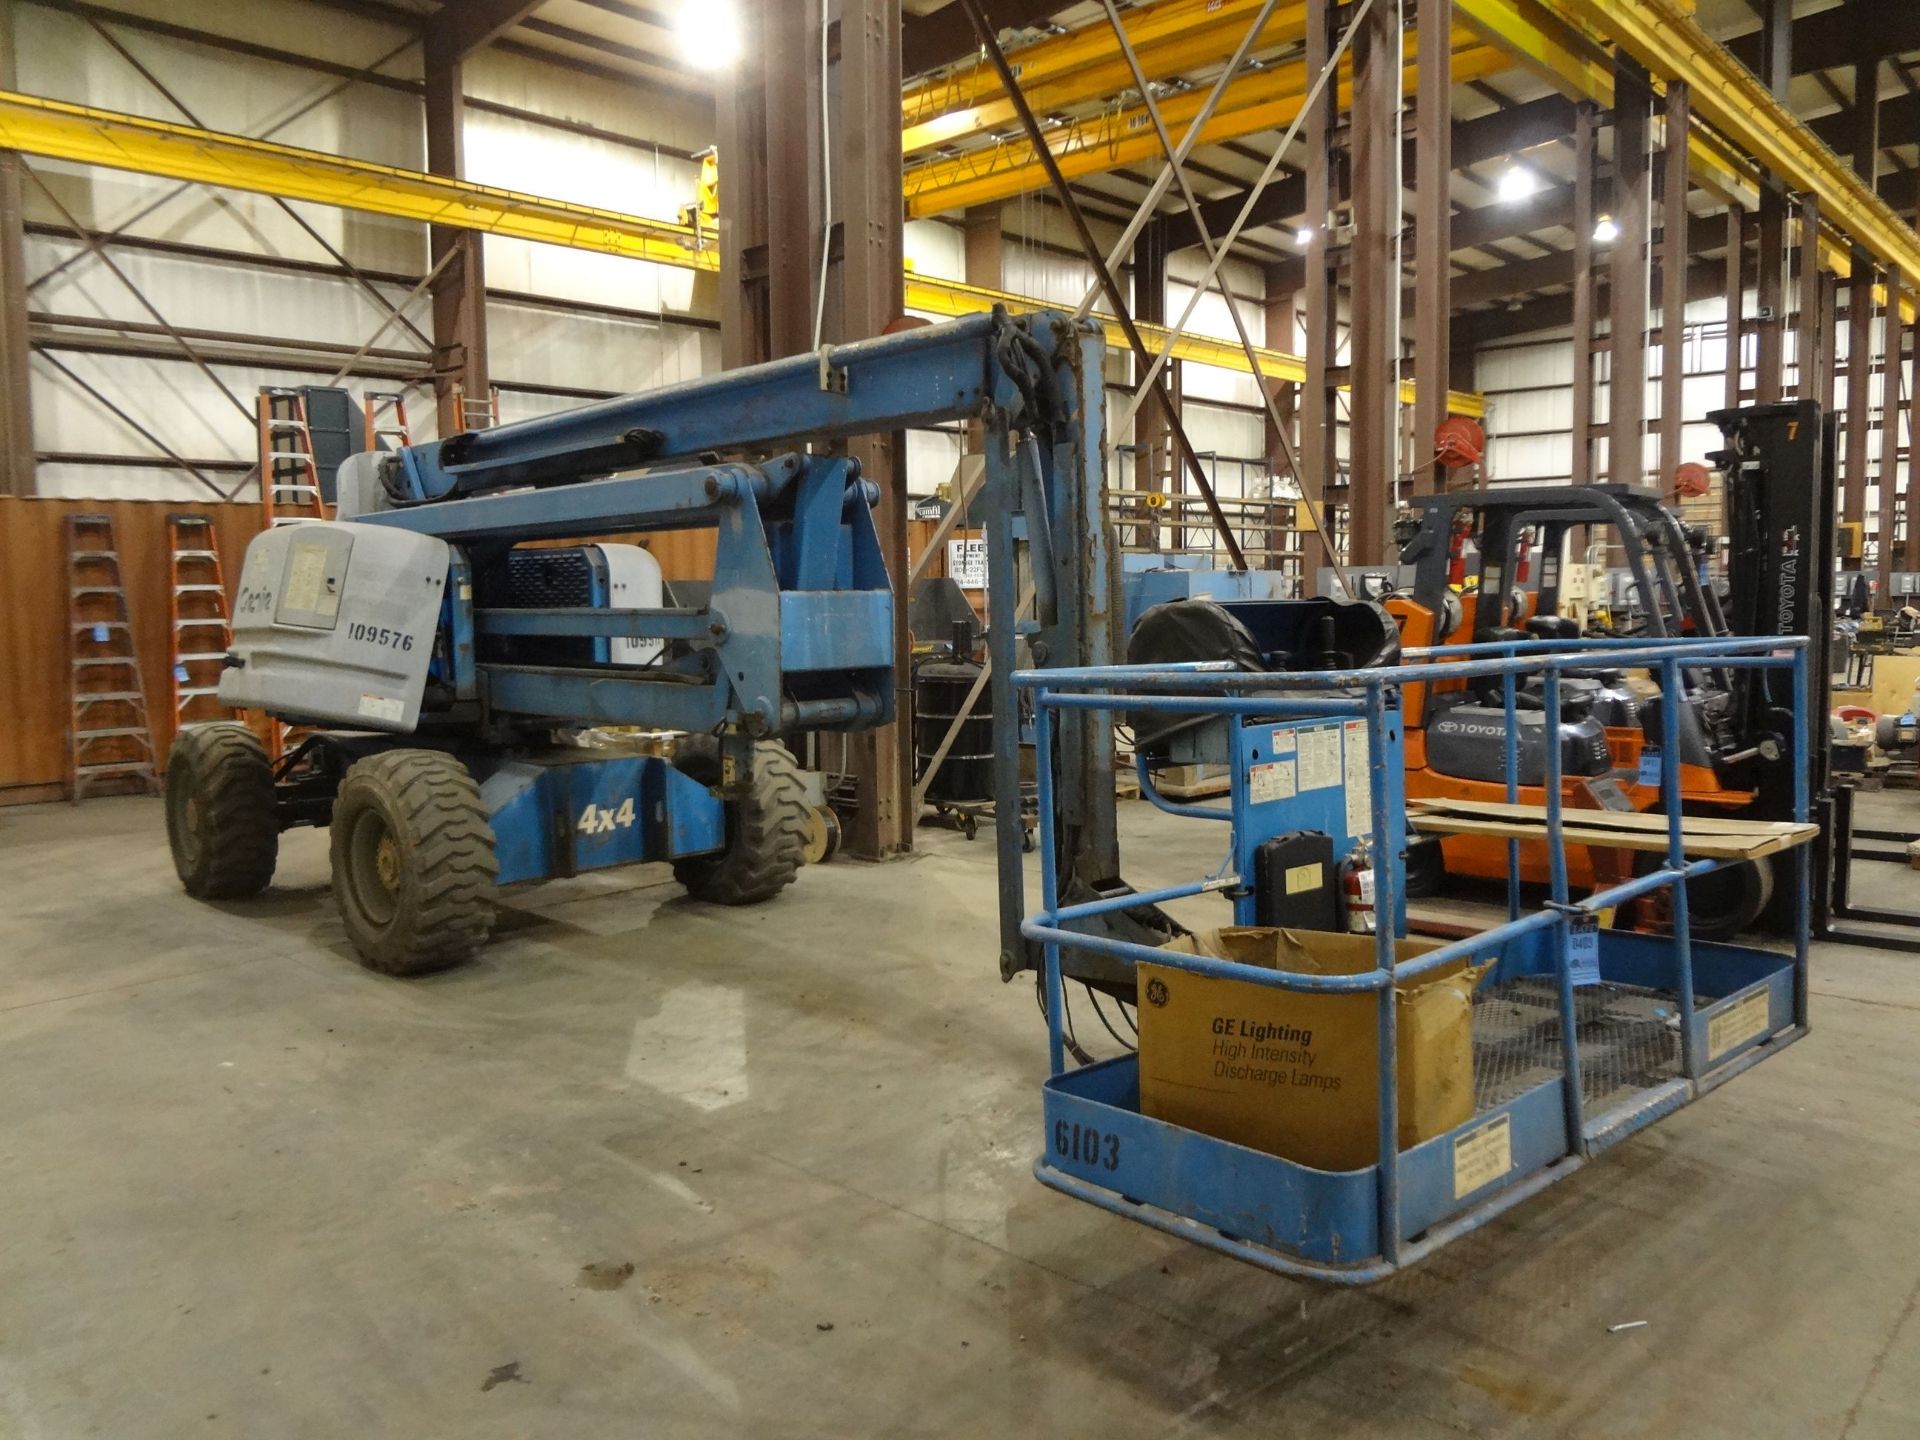 GENIE MODEL Z-60/34 4X4 GASOLINE OR LP GAS POWERED BOOM LIFT; S/N 109576, 2,441 HOURS SHOWING, 20